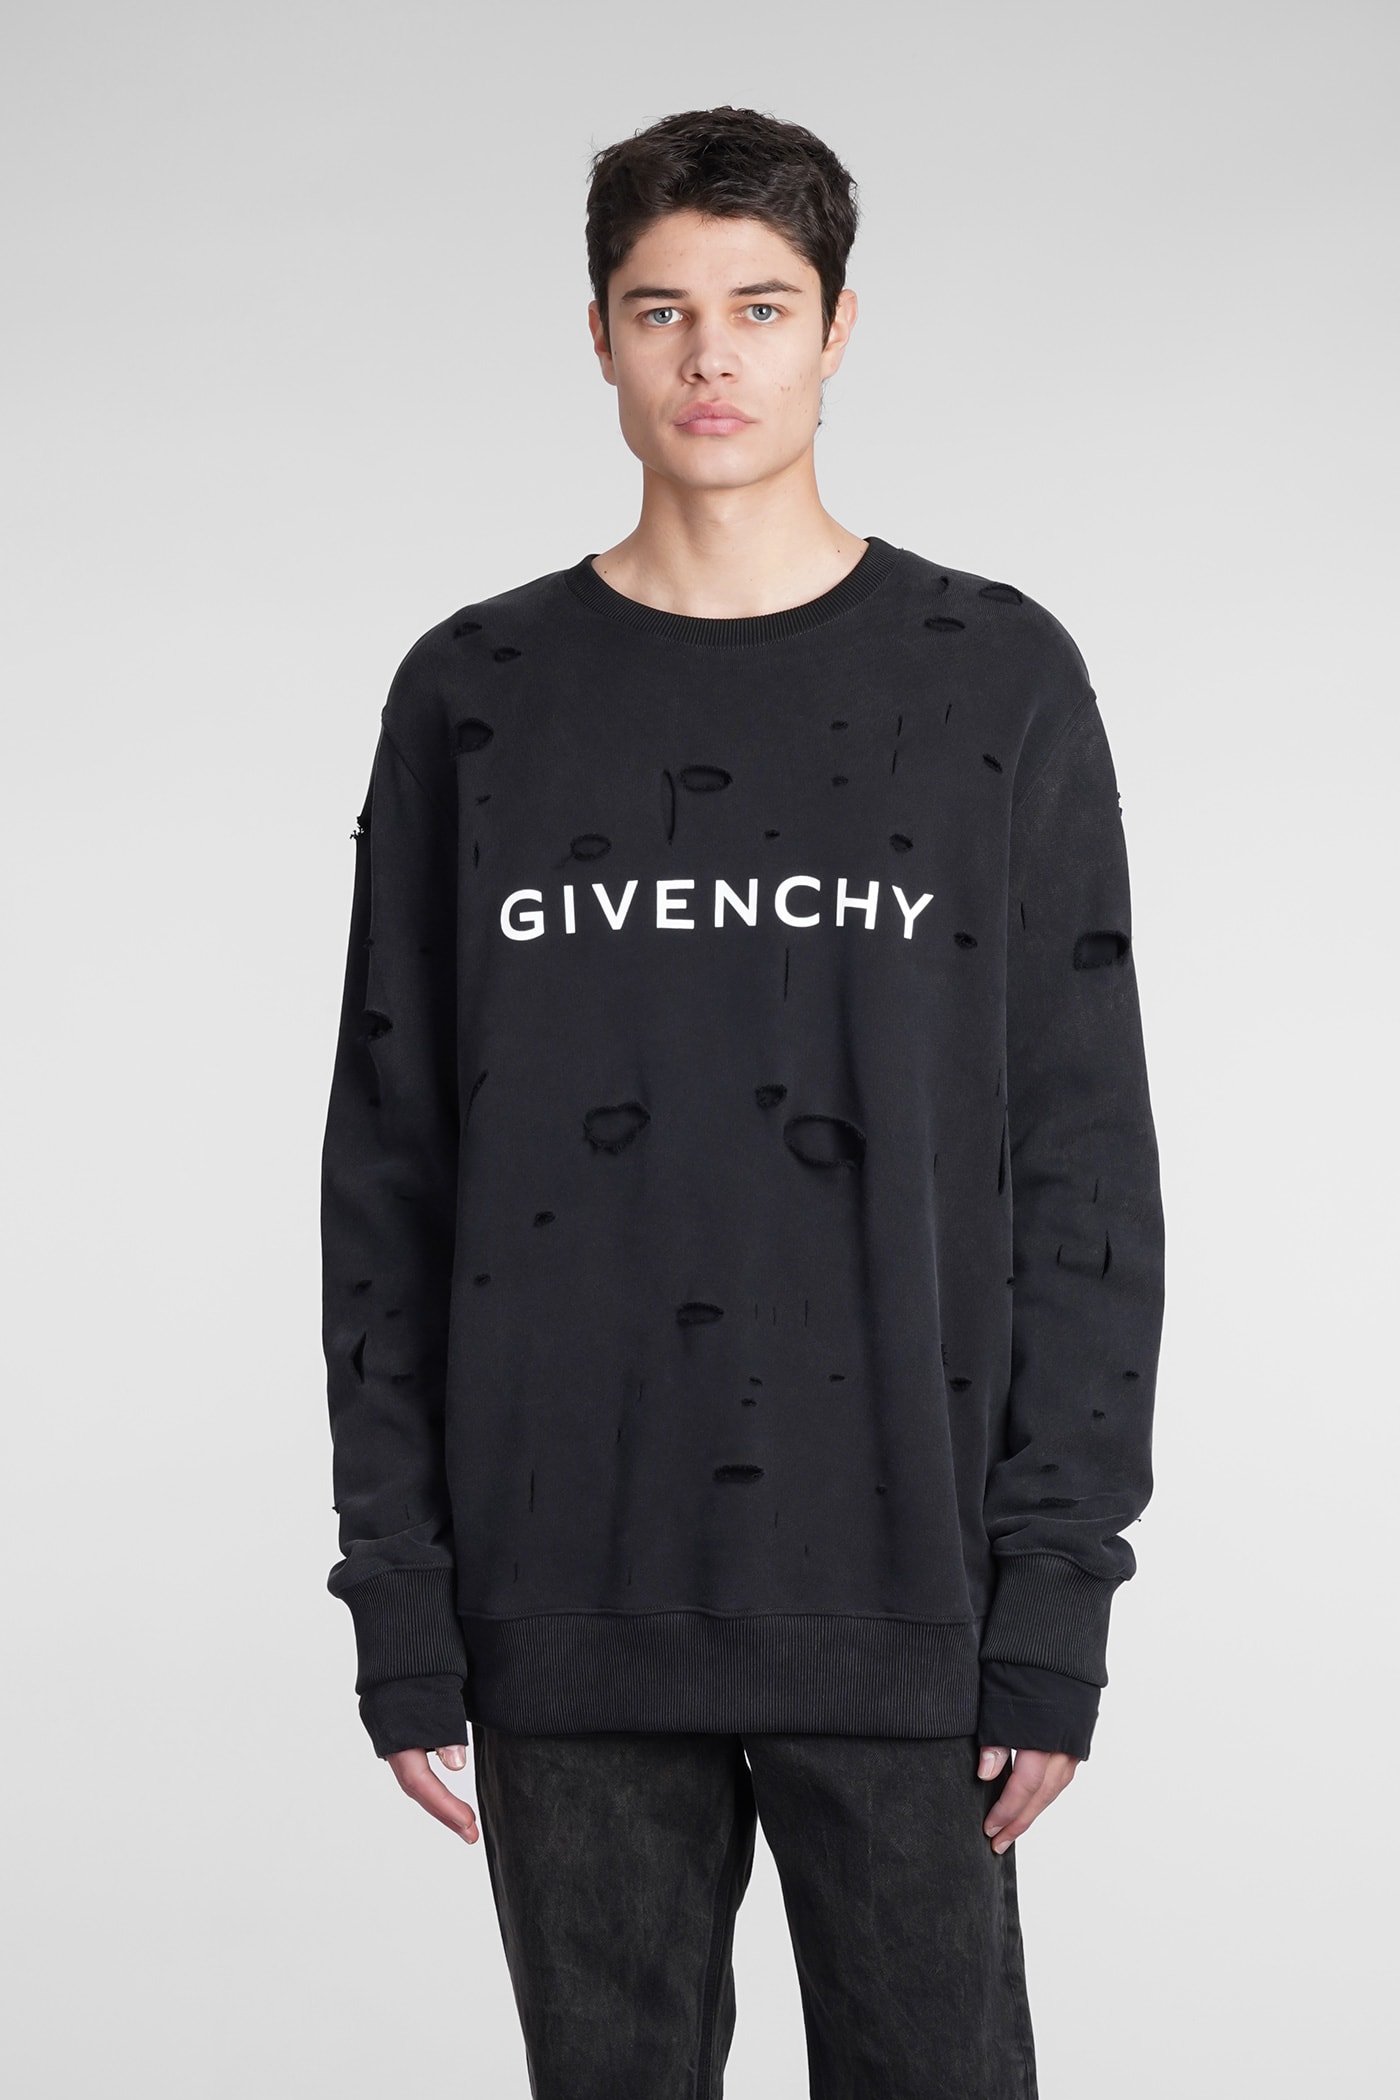 GIVENCHY SWEATSHIRT IN BLACK COTTON